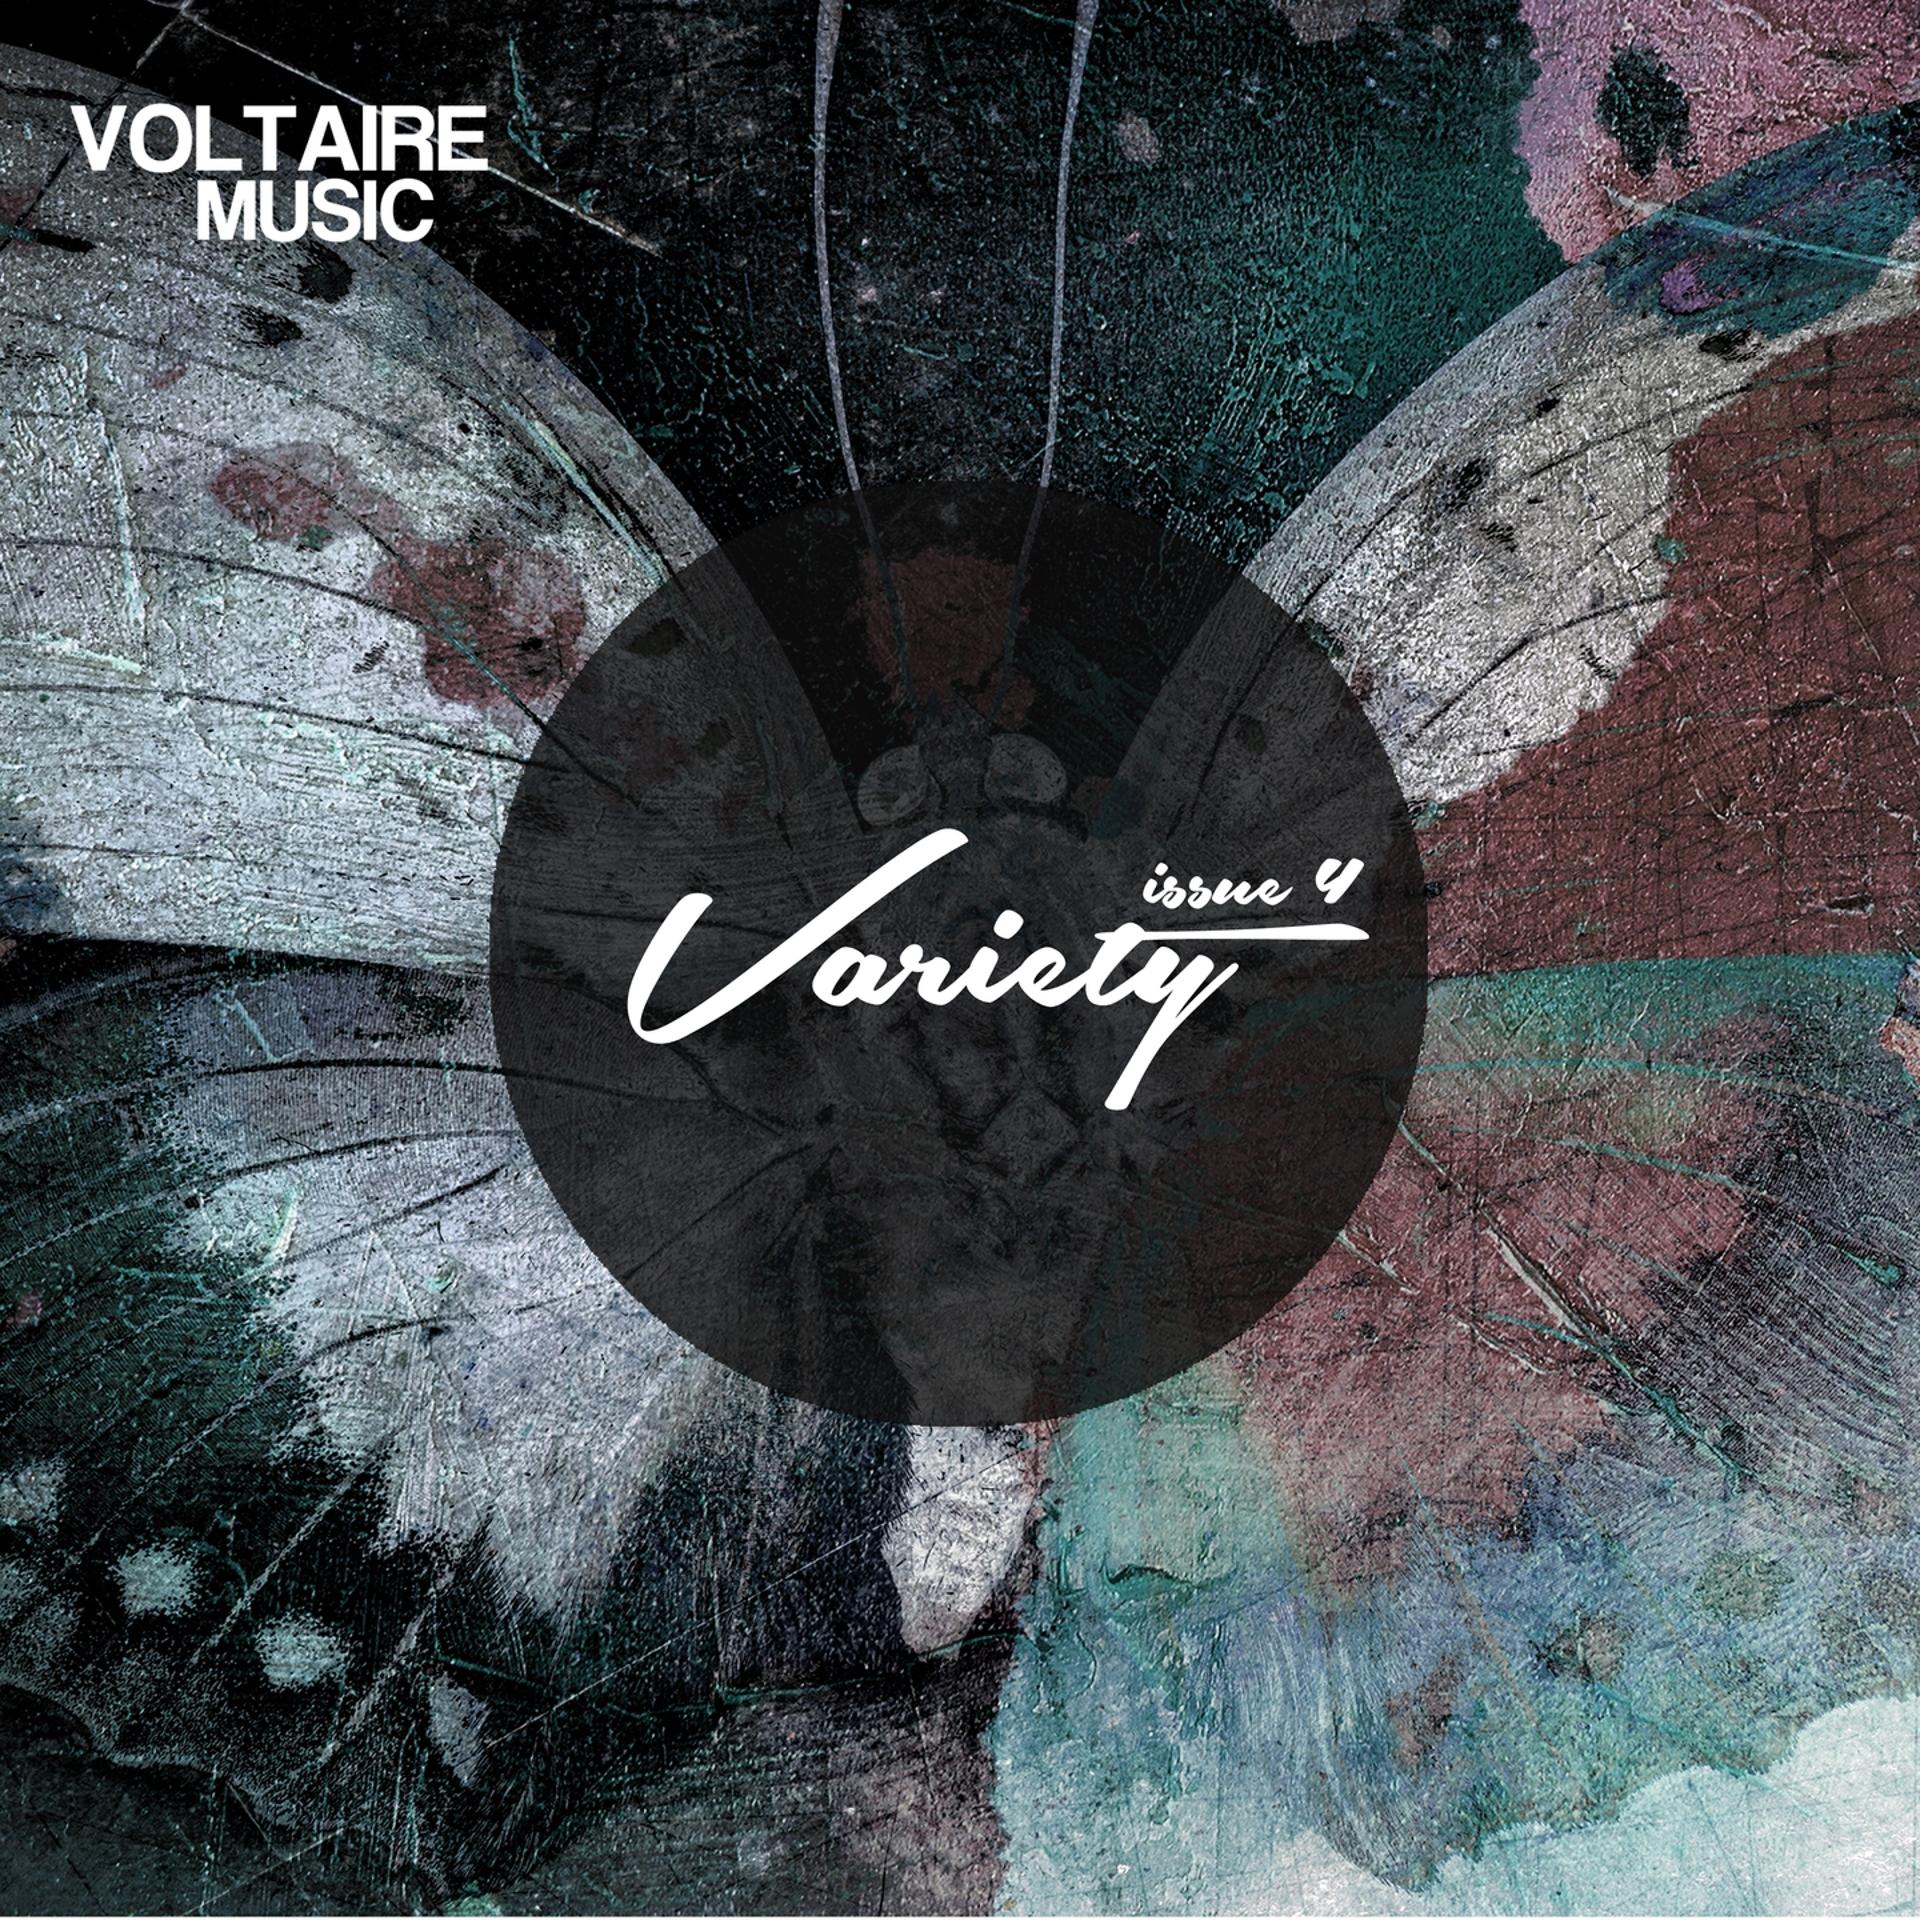 Постер альбома Voltaire Music pres. Variety Issue 4